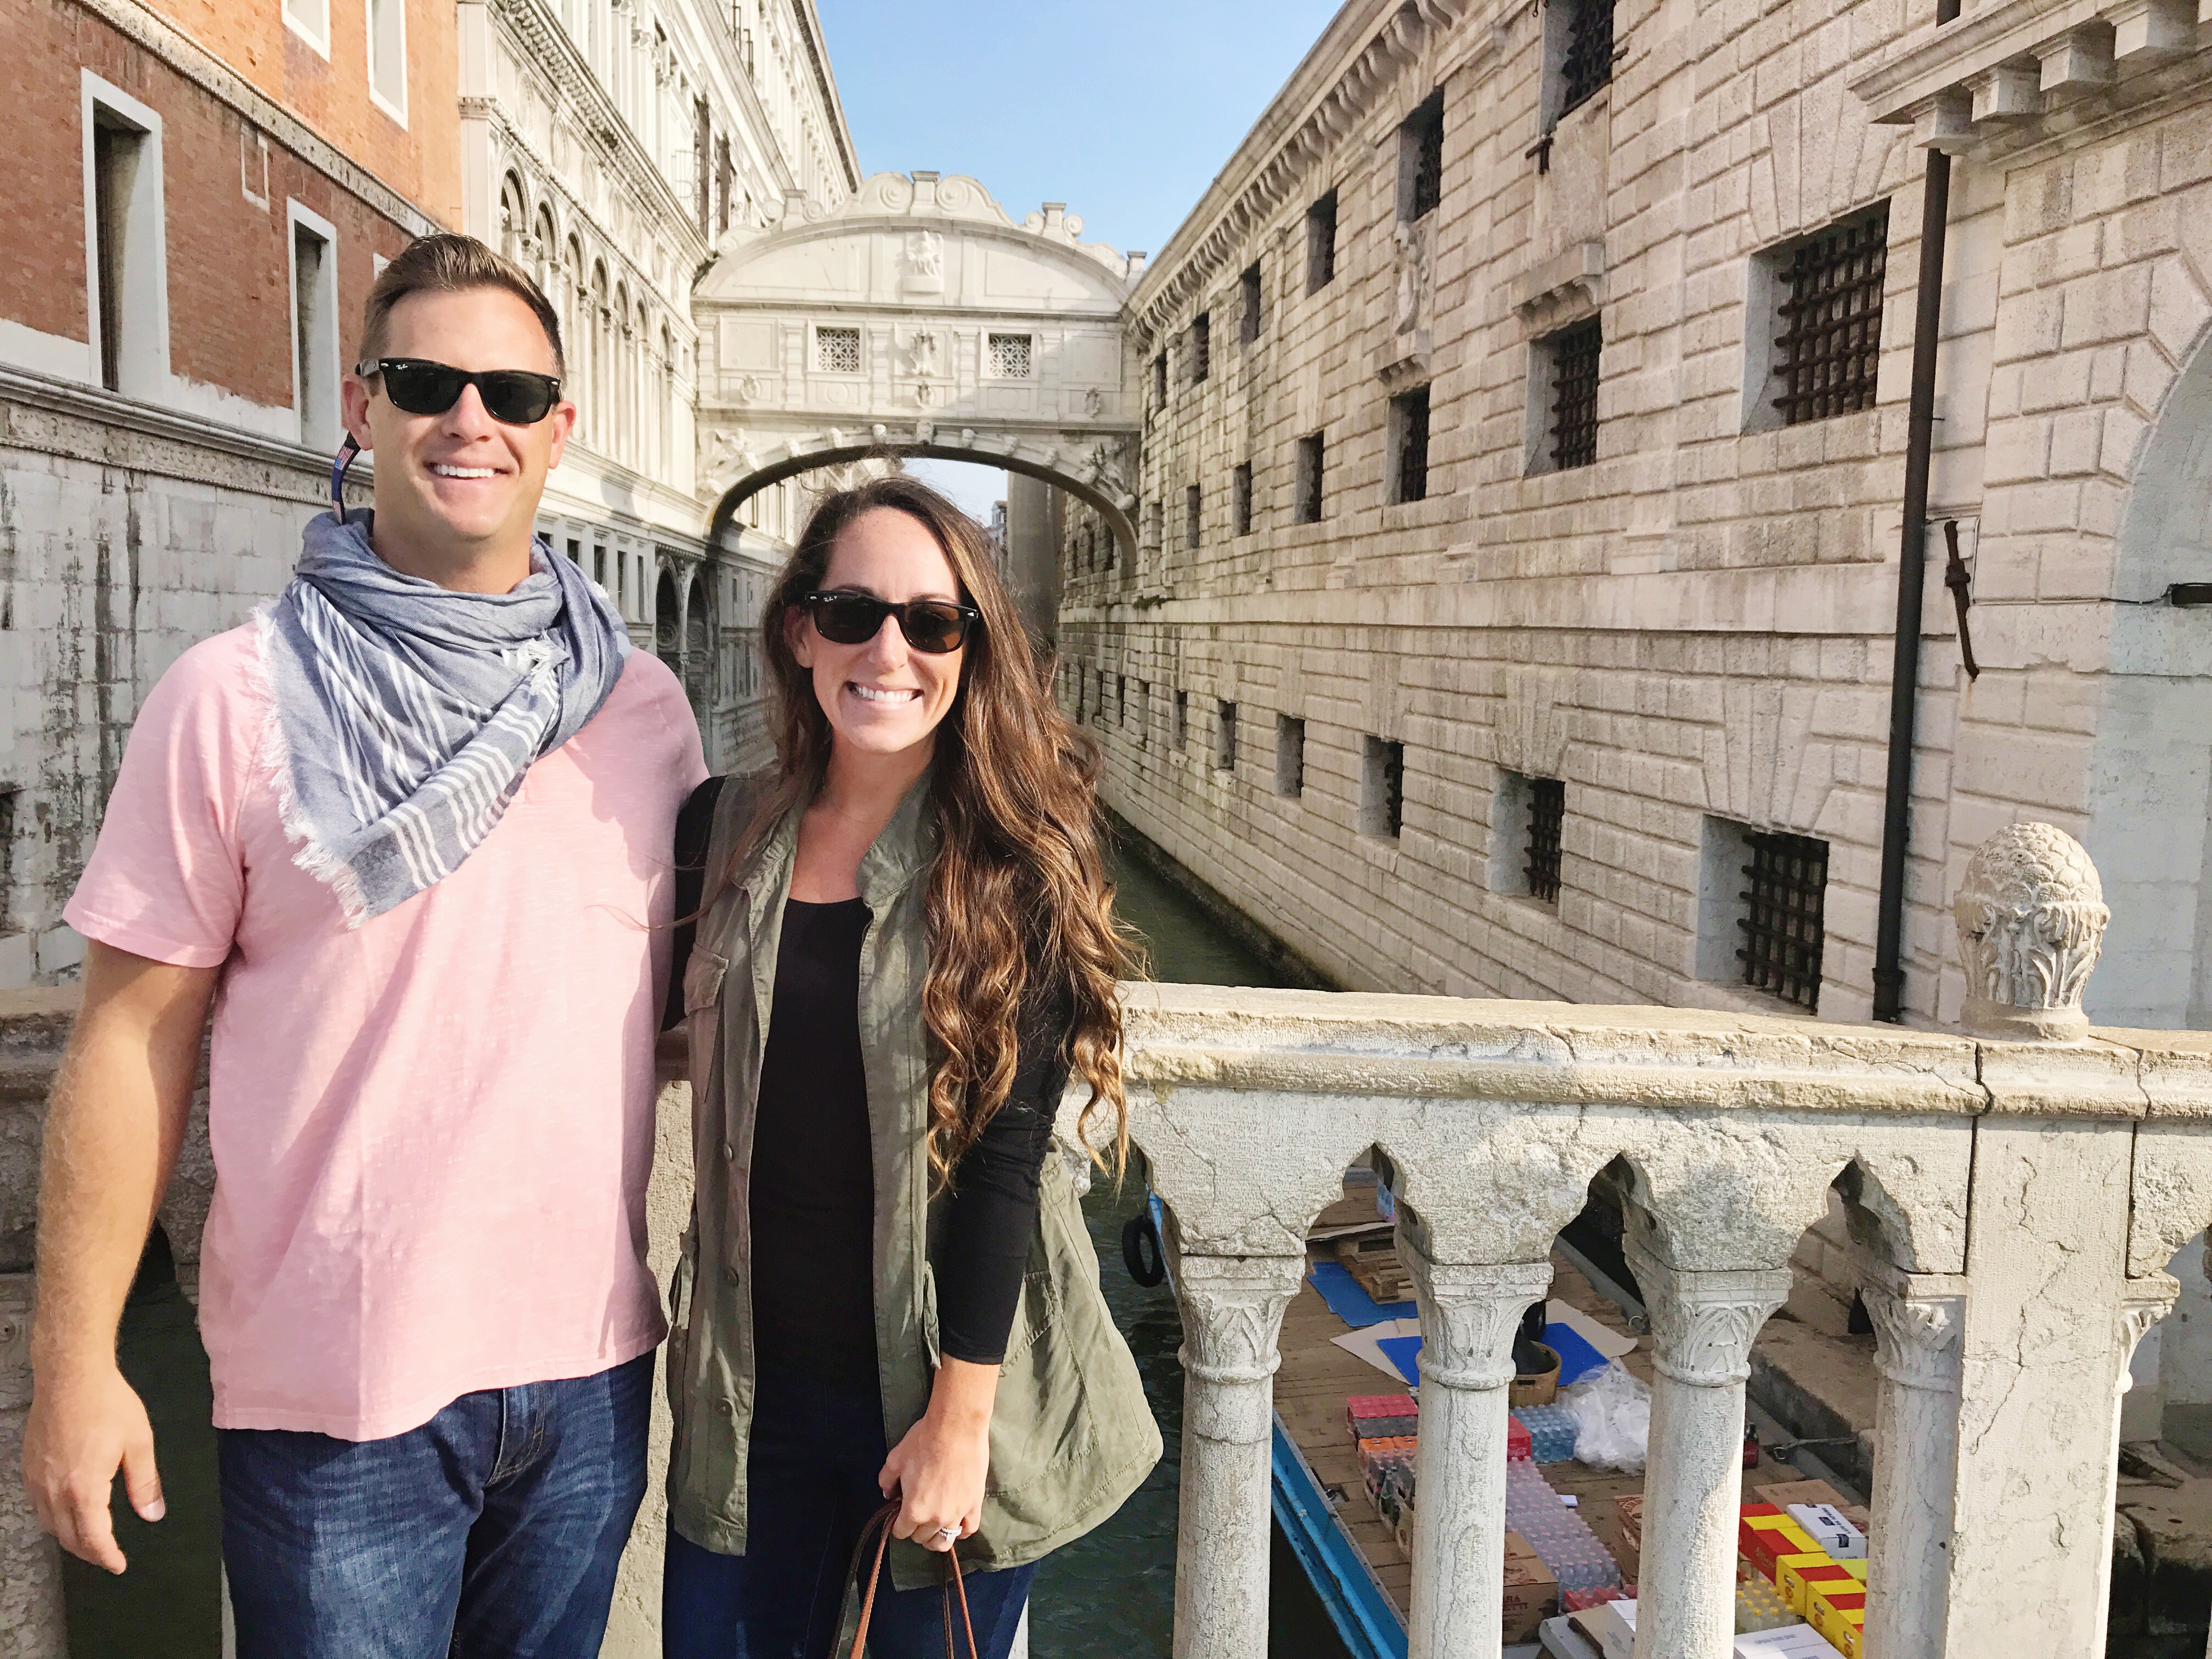 3 Days In Venice - What to do in Venice Italy - Things to do in Venice - Italy Itinerary - Planning a trip to Venice, Italy - Venice Italy Photography - Communikait by Kait Hanson